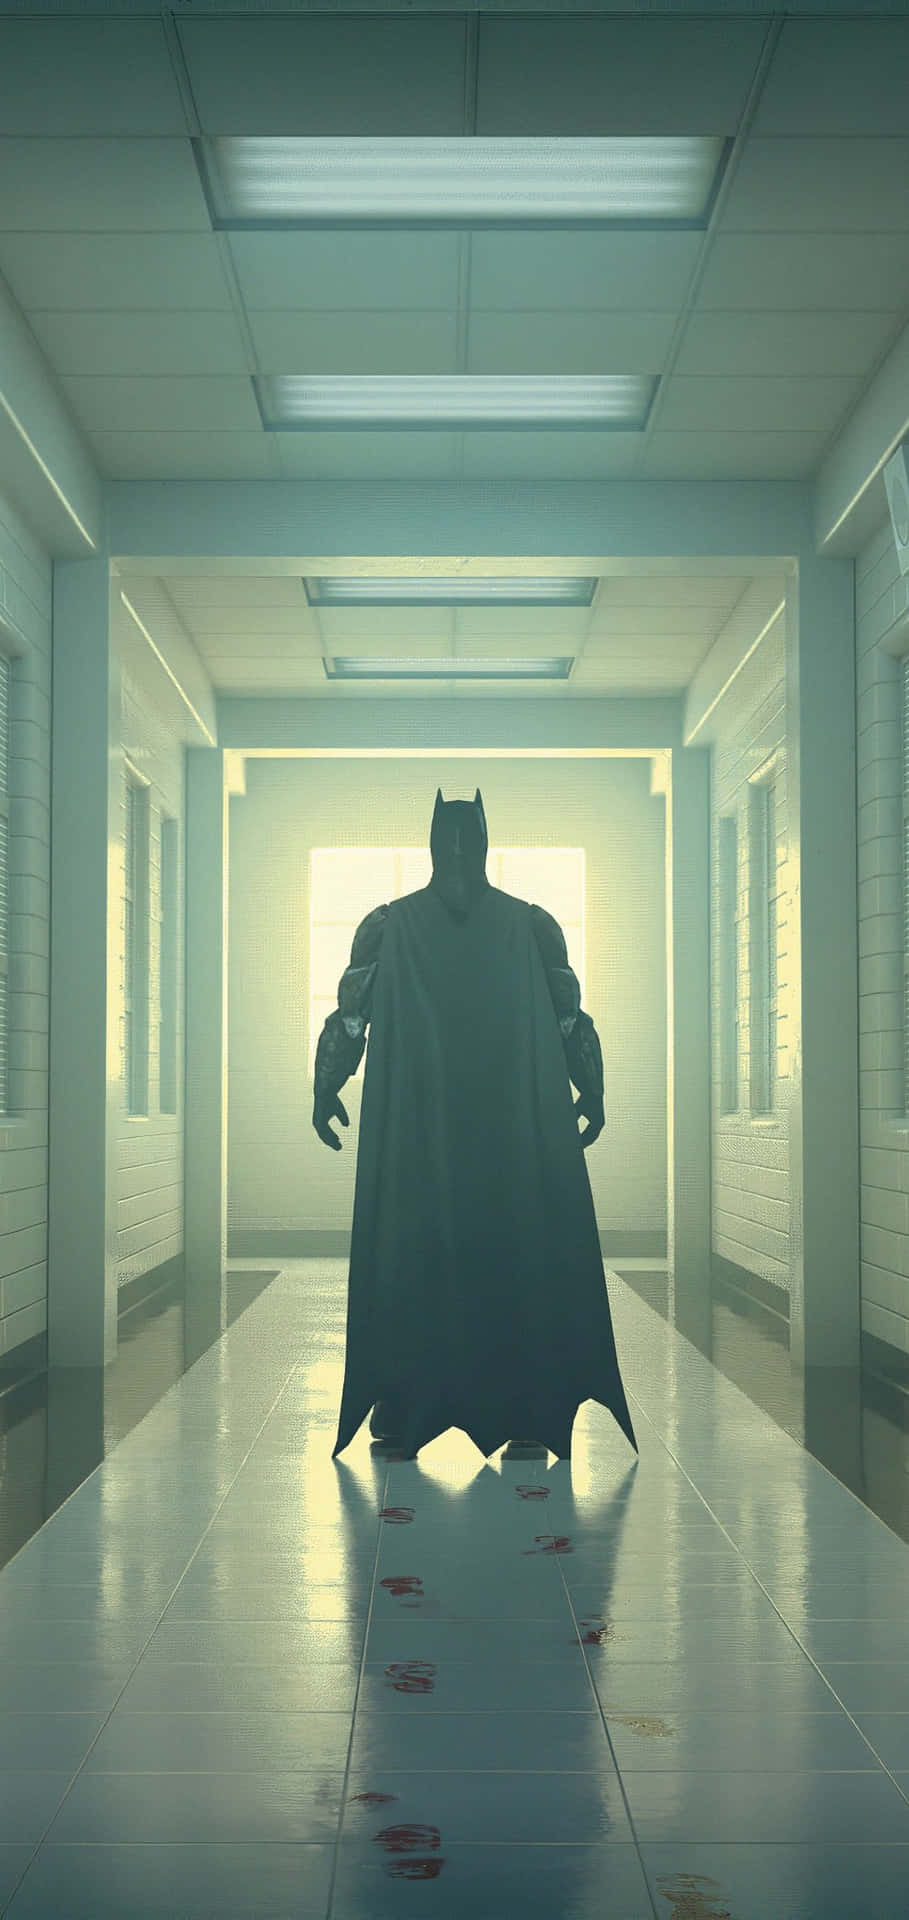 Instantly Up Your Style Game with an Awesome Batman iPhone Wallpaper